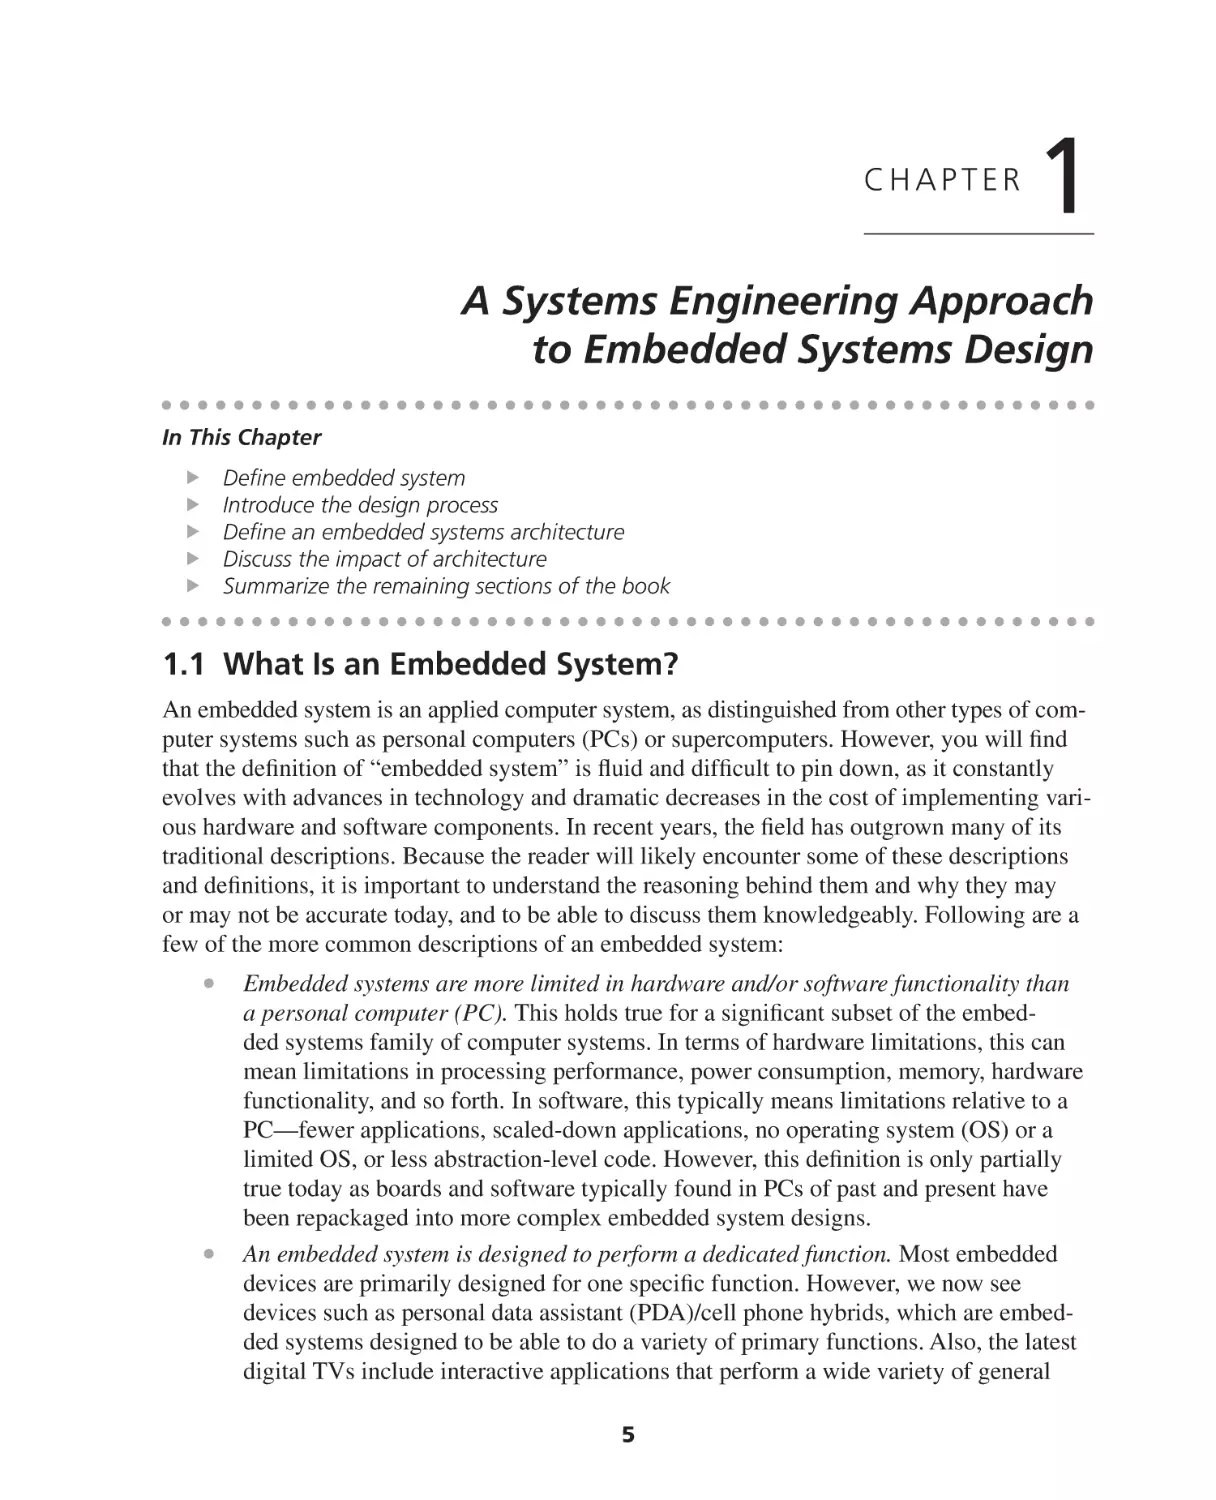 Chapter 1. A Systems Engineering Approach to Embedded Systems Design
1.1 What Is an Embedded System?